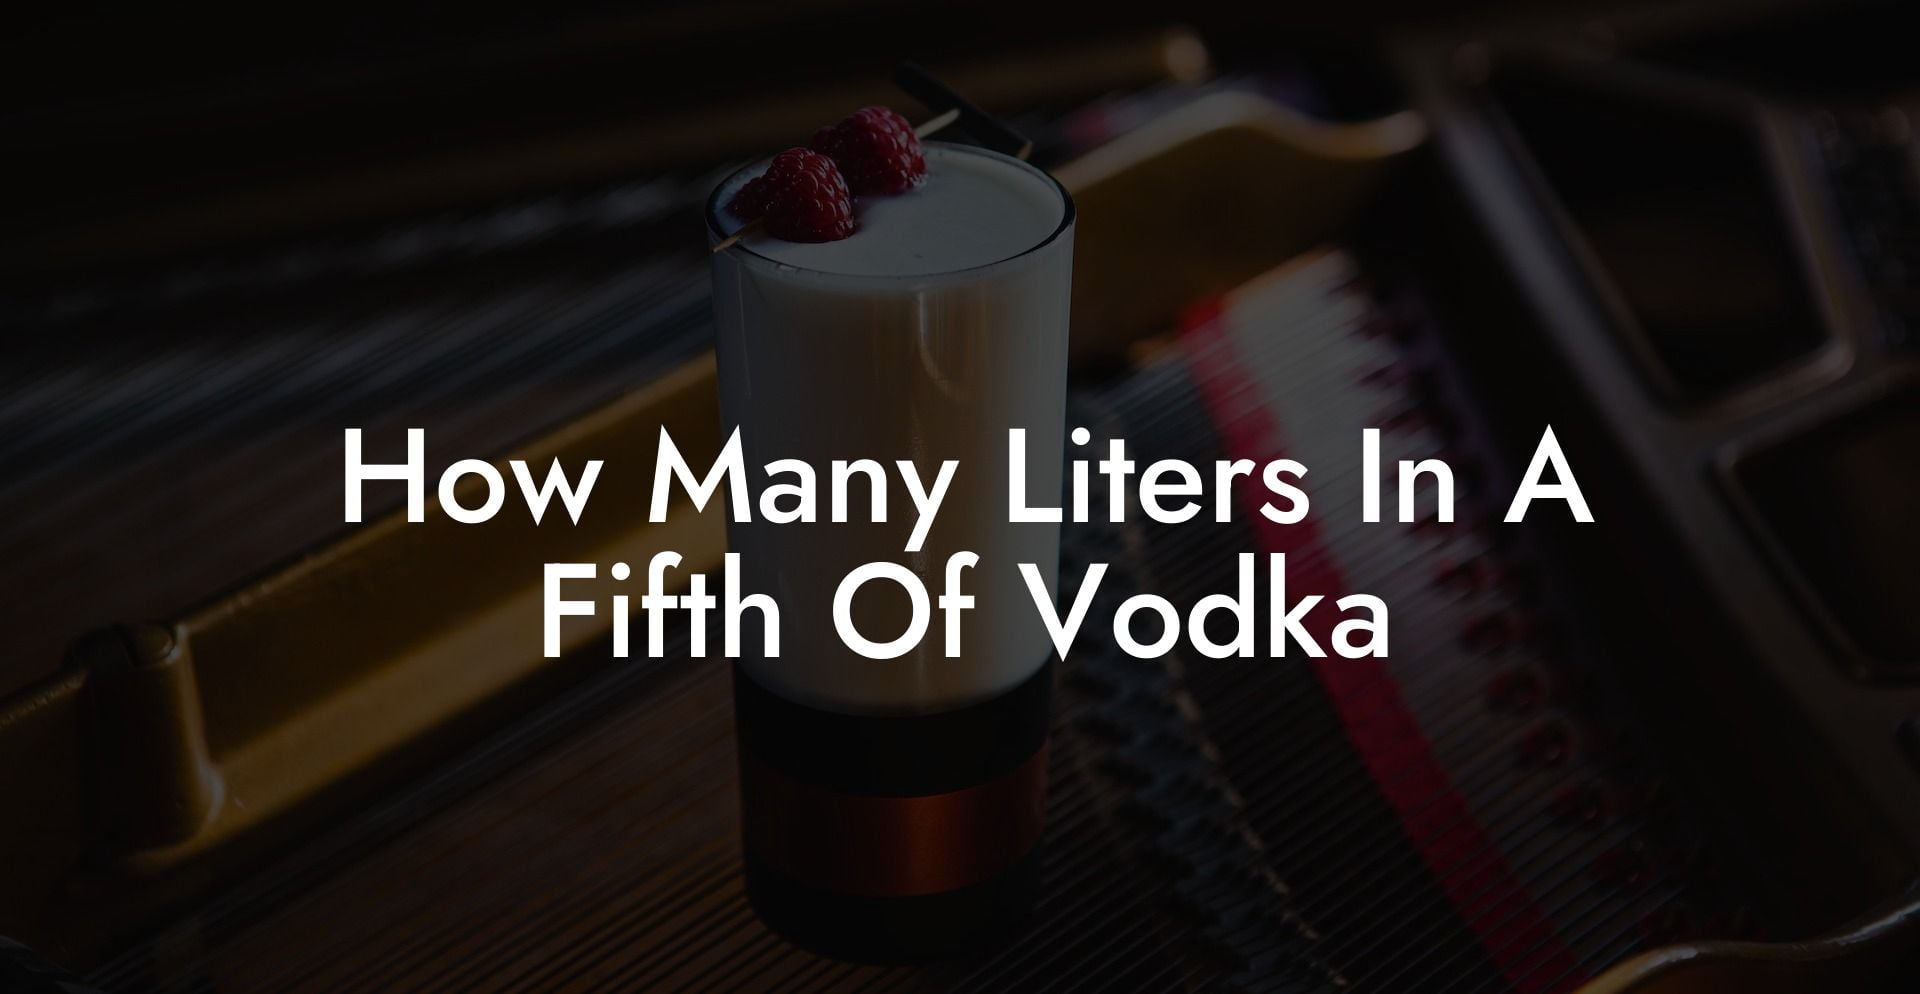 How Many Liters In A Fifth Of Vodka